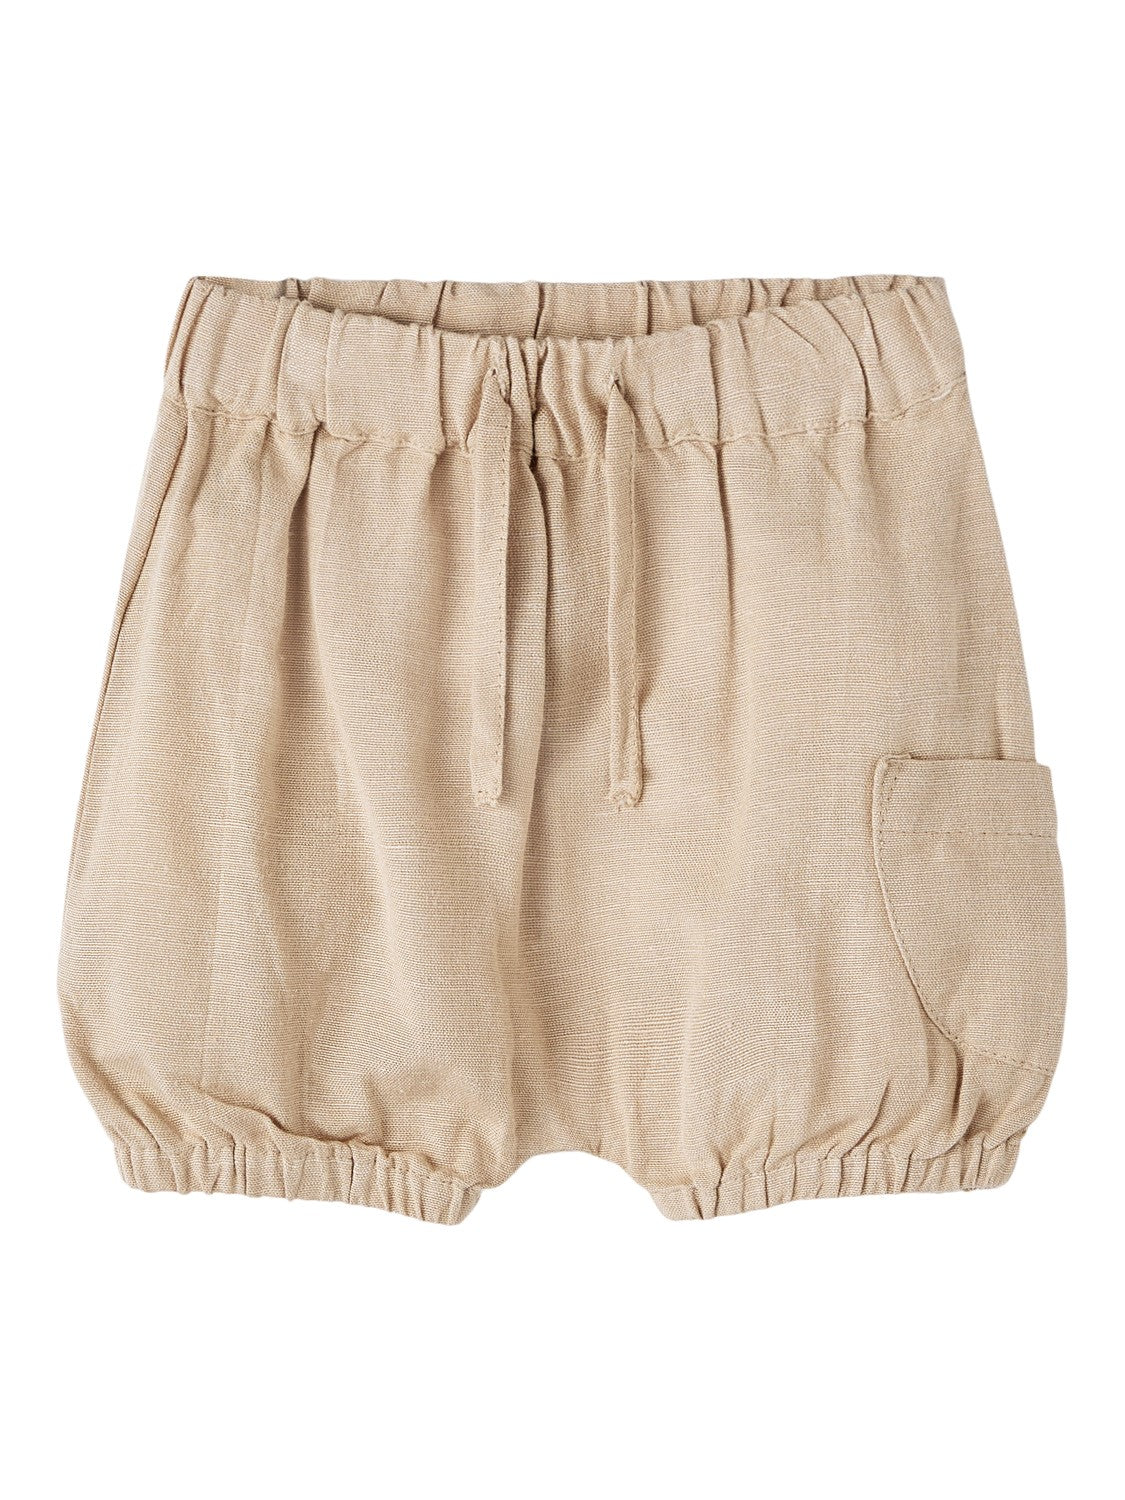 Name-it Faher Shorts Sand